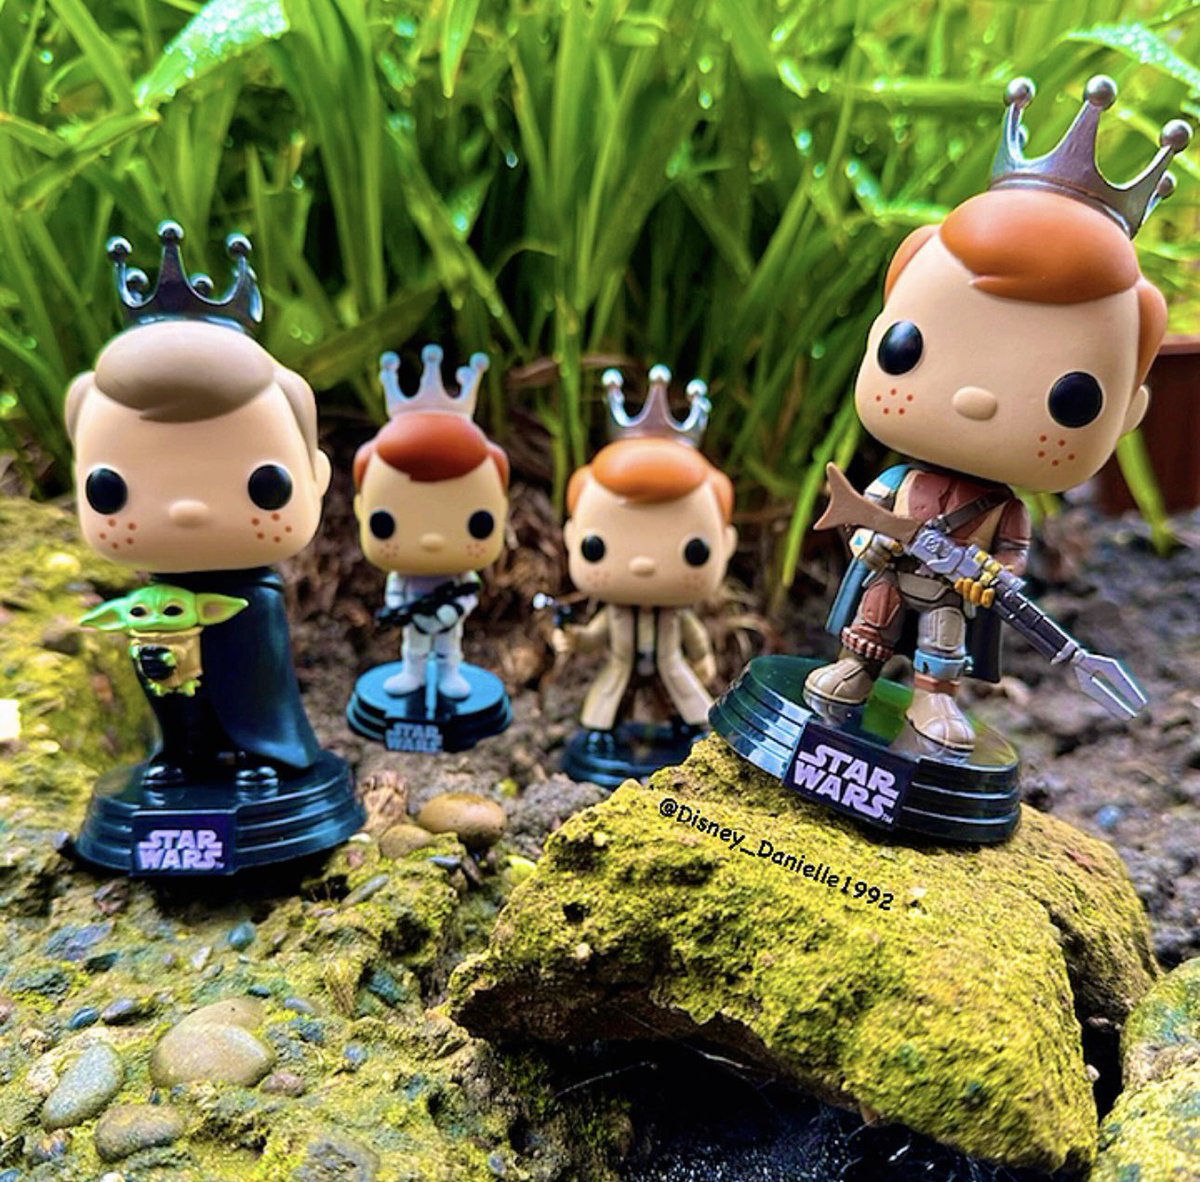 🪐 May the 4th be with you! 🪐

Today being Star Wars day was the perfect excuse to get some of my Star Wars Freddy’s out of their boxes & outside for a Funko shoot! 

💥May the force be with you! 💥

#FunkoPOPVinyl #MyFunkoStory #FunkoUnboxed #Funko 

@OriginalFunko @FunkoEurope